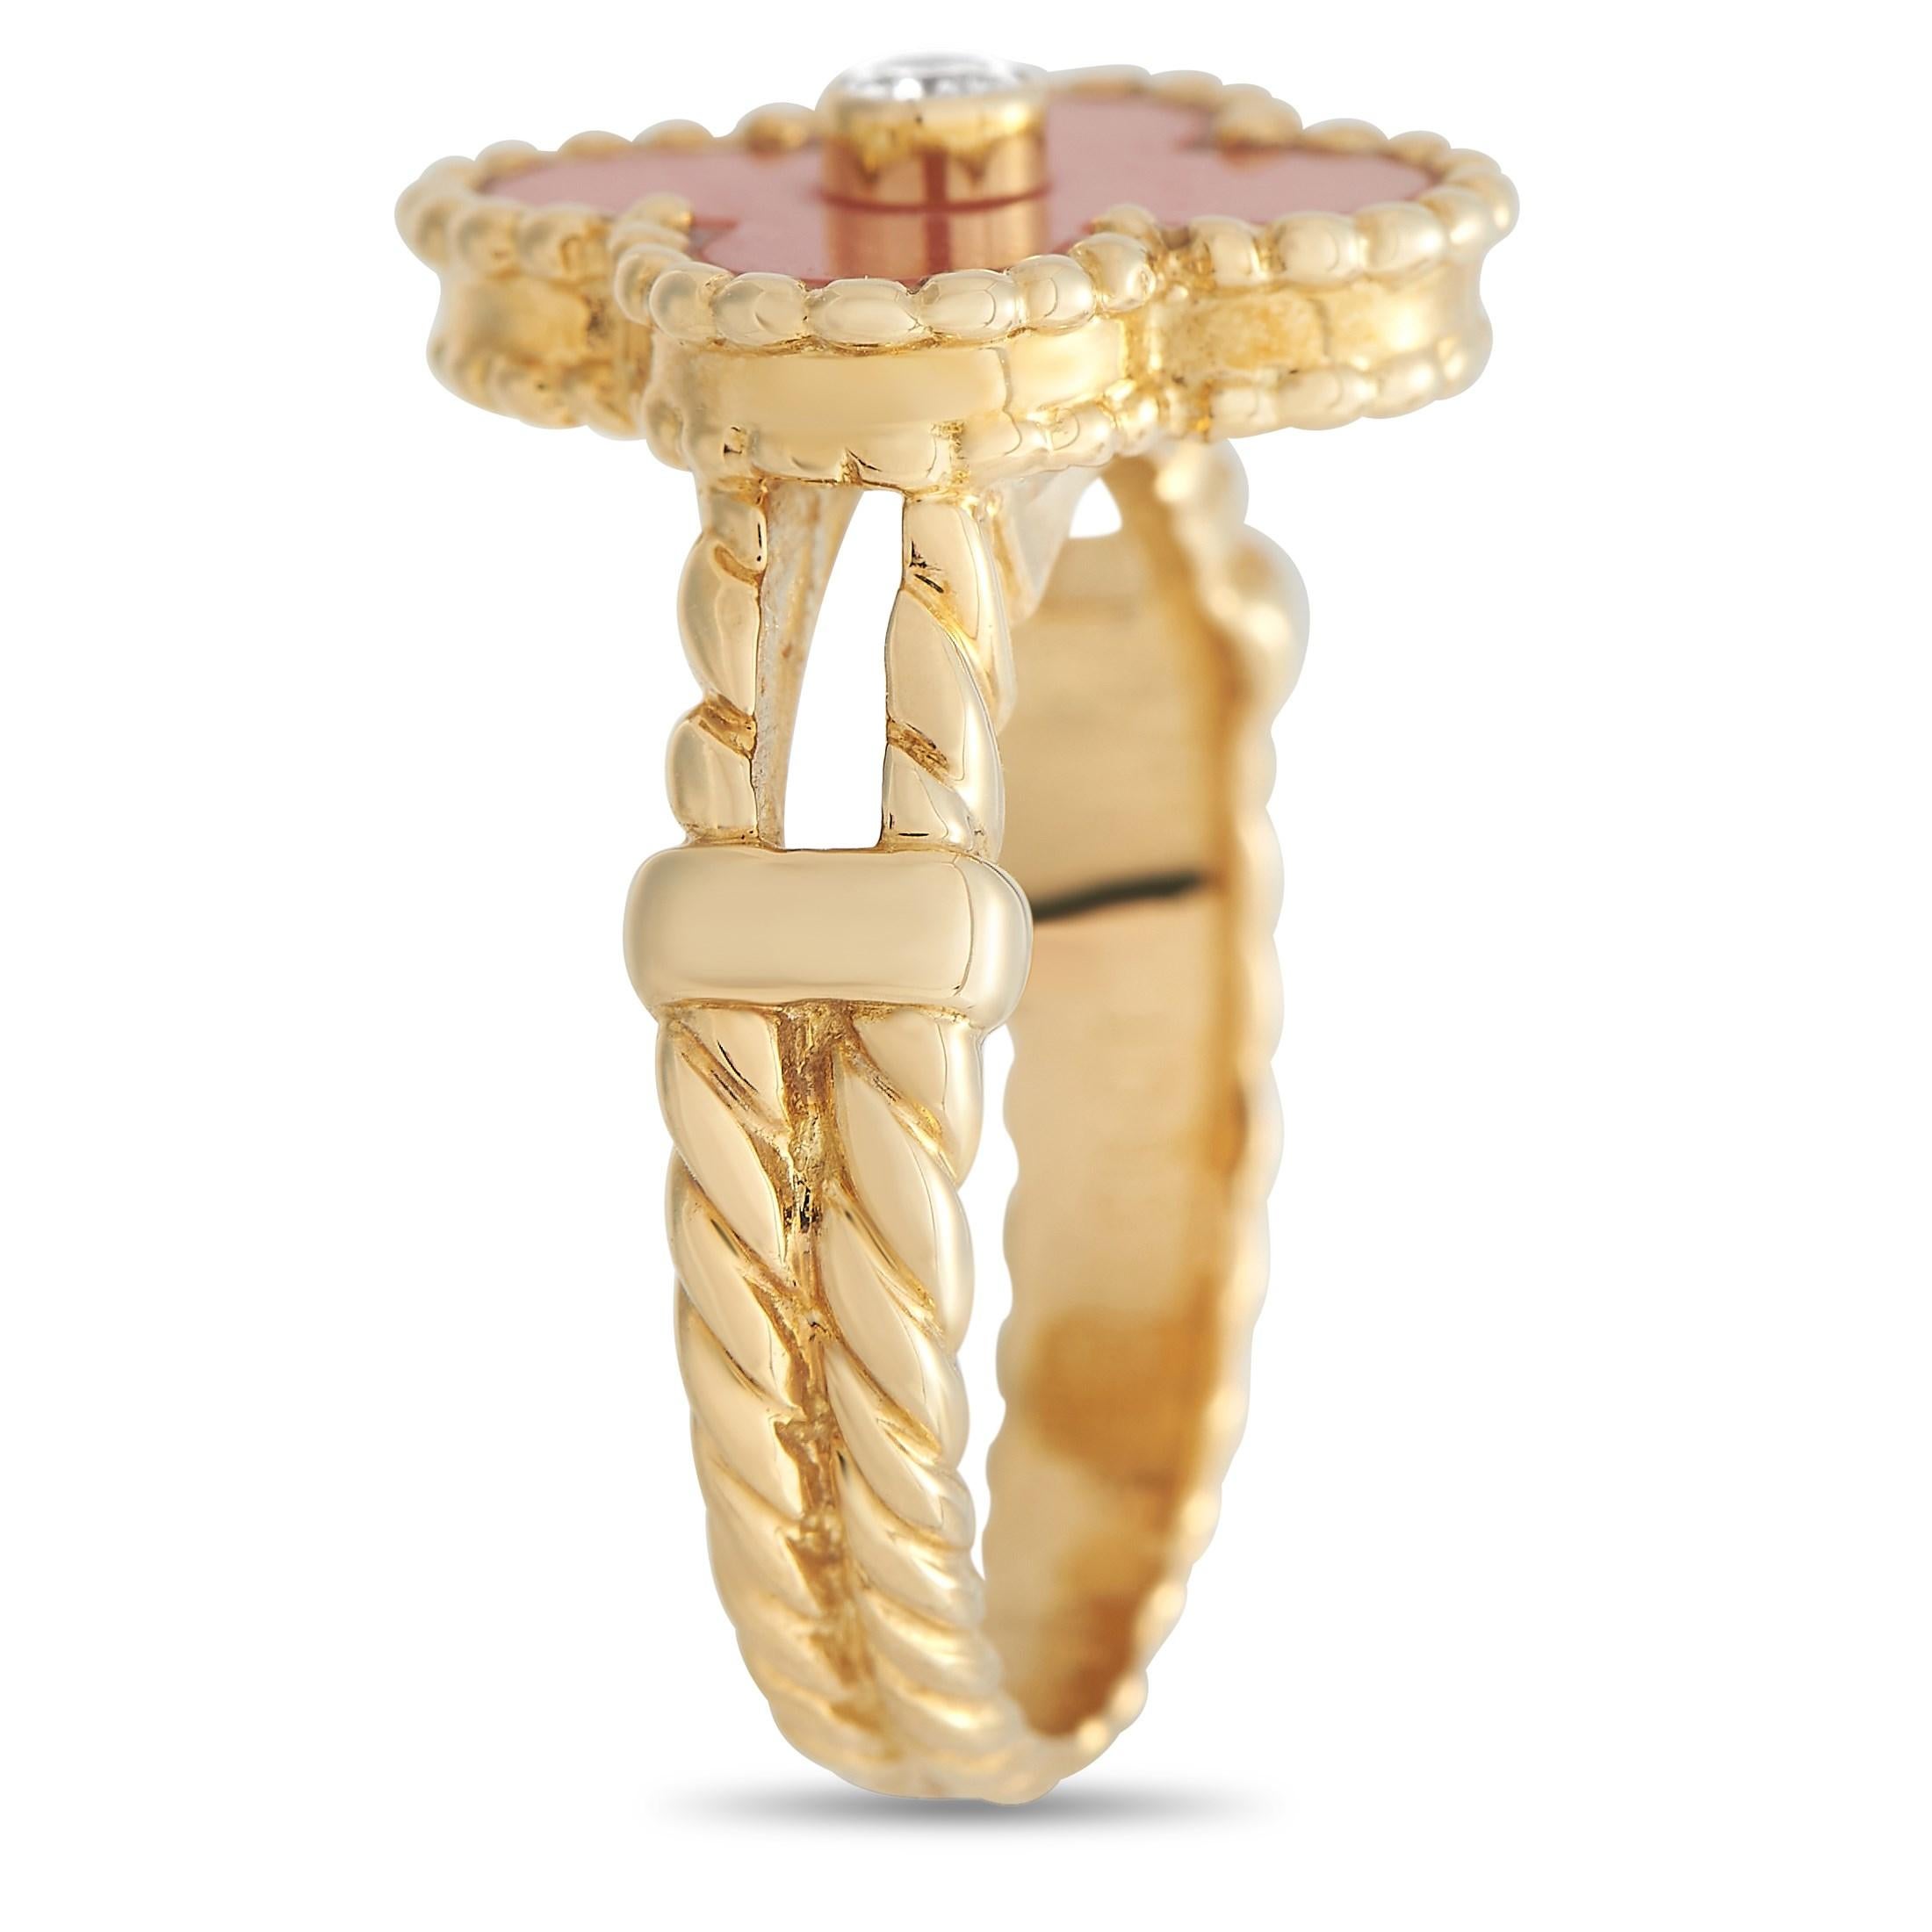 This Van Cleef & Arpels Alhambra ring is dynamic, eye-catching, and incredibly luxurious. A warm inset makes the brand’s iconic clover shape come to life, while a singular bezel-set stone at the center provides the perfect finishing touch. This